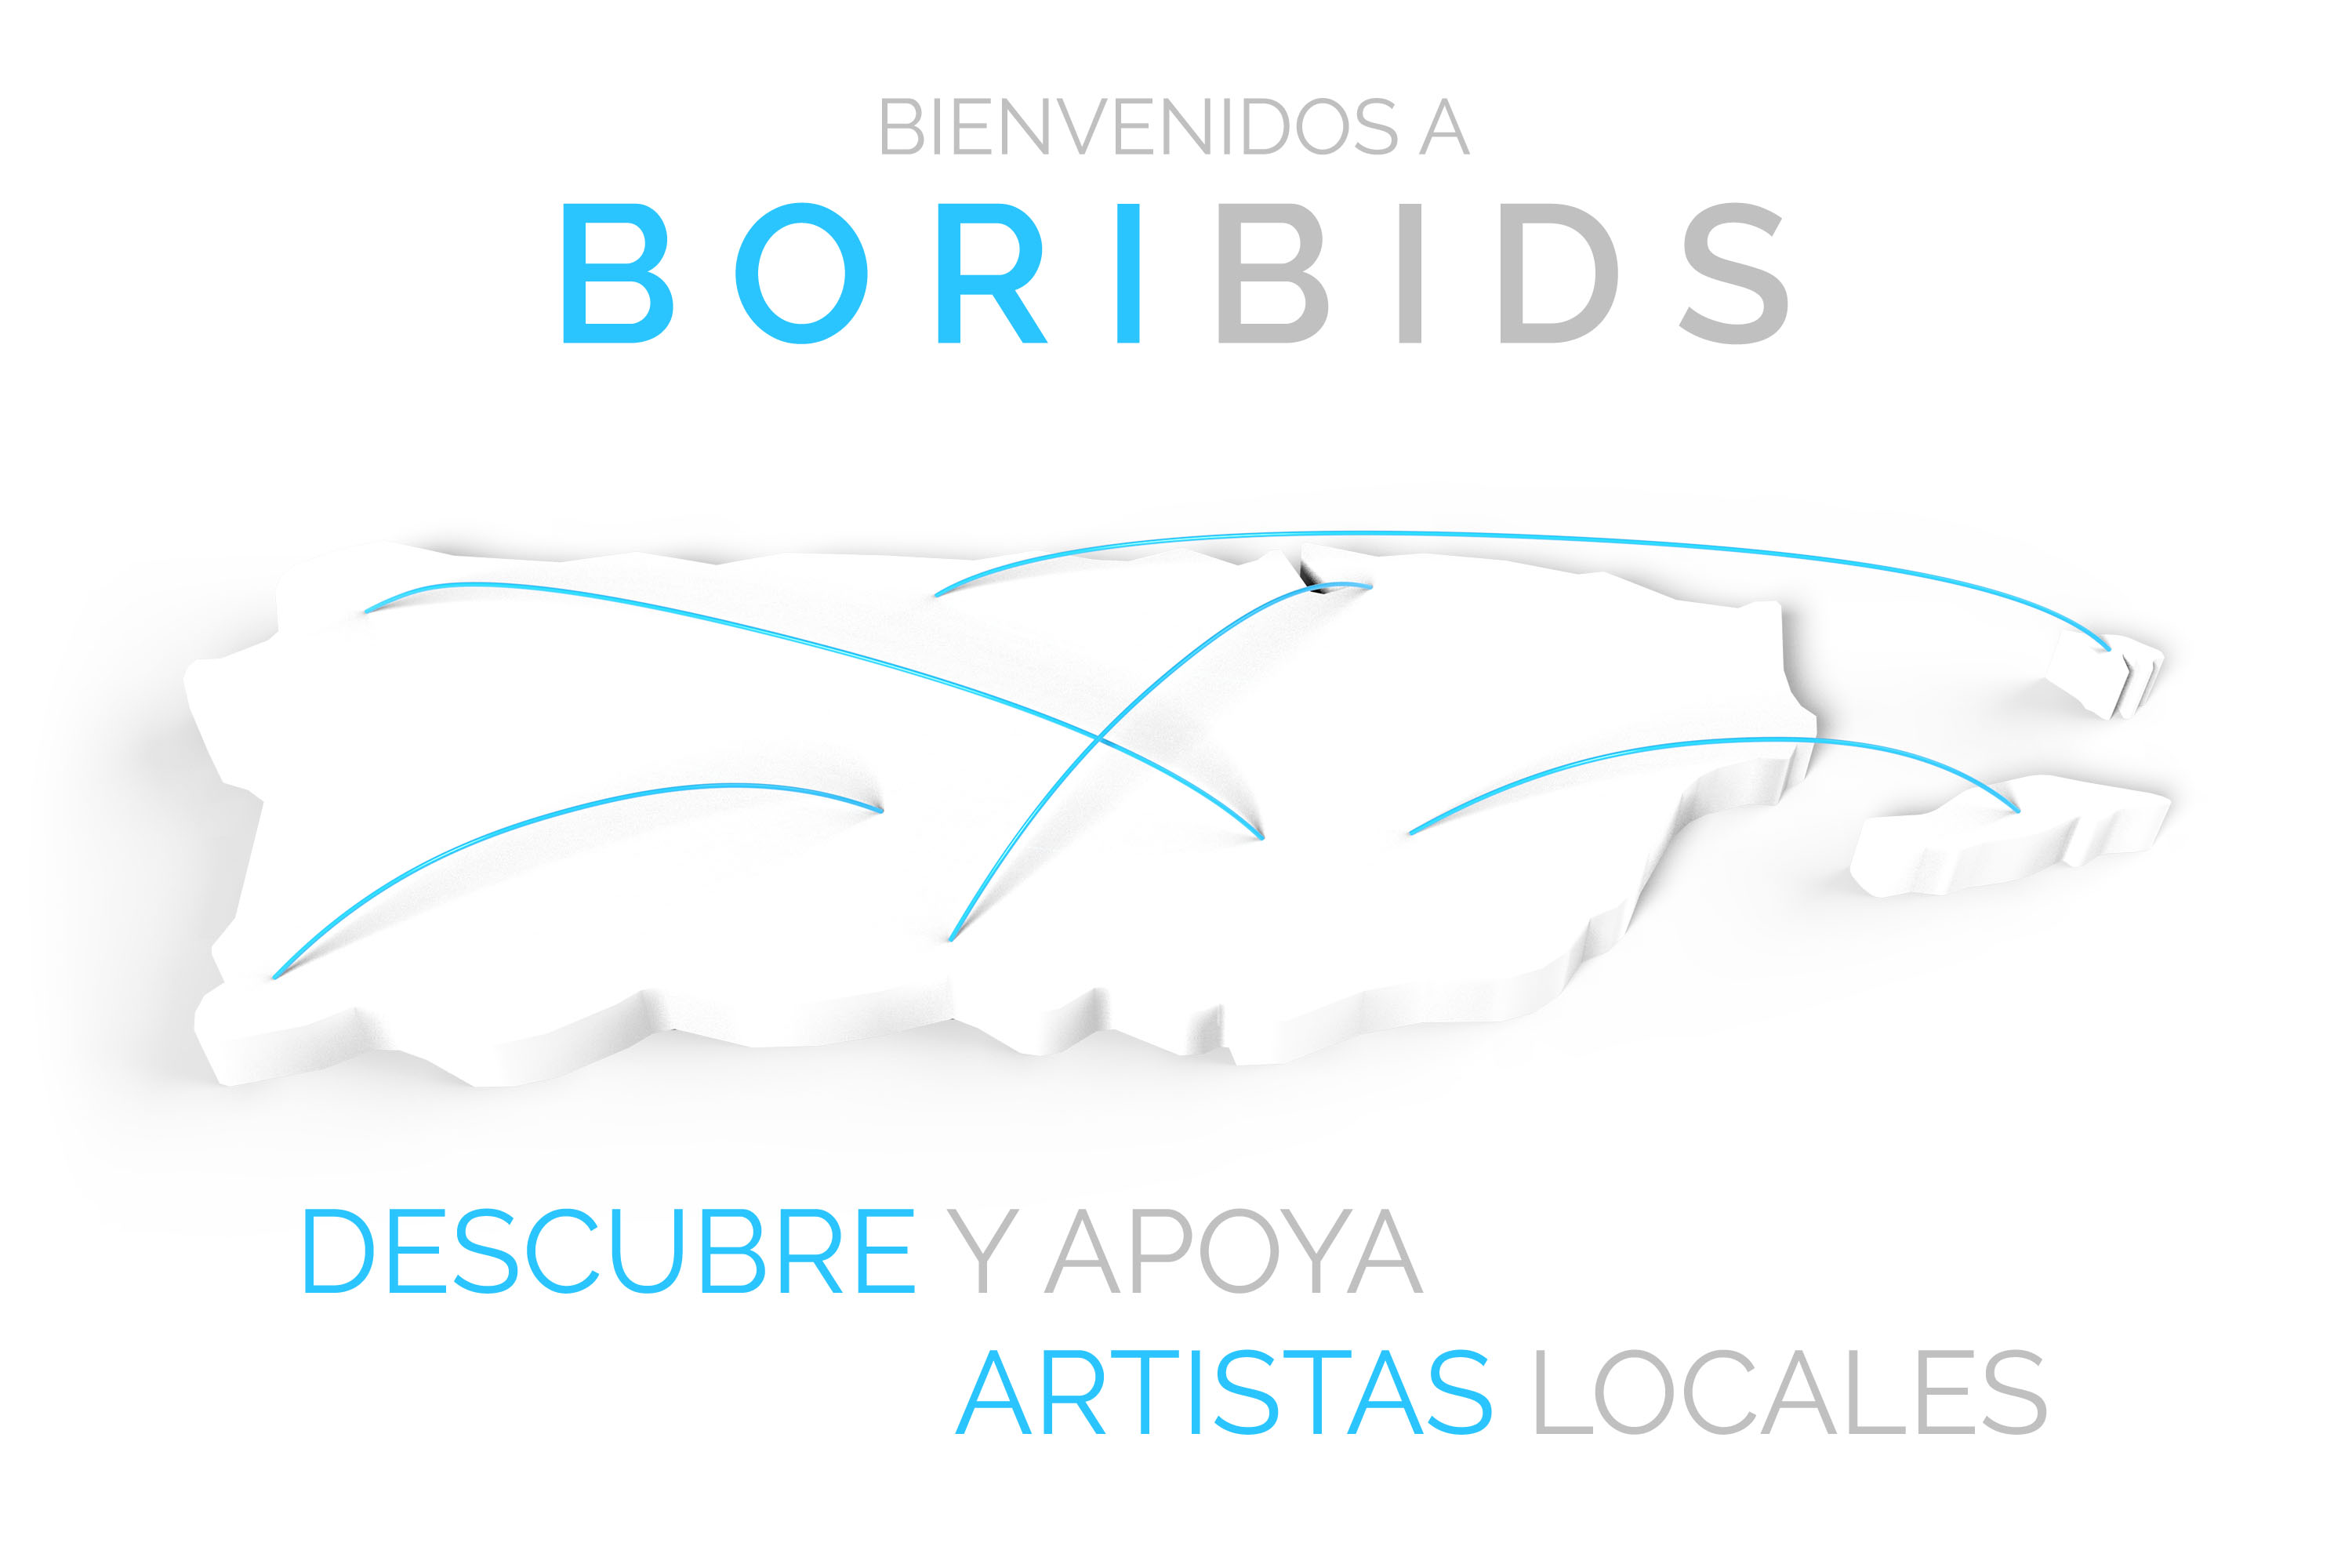 Welcome to Boribids